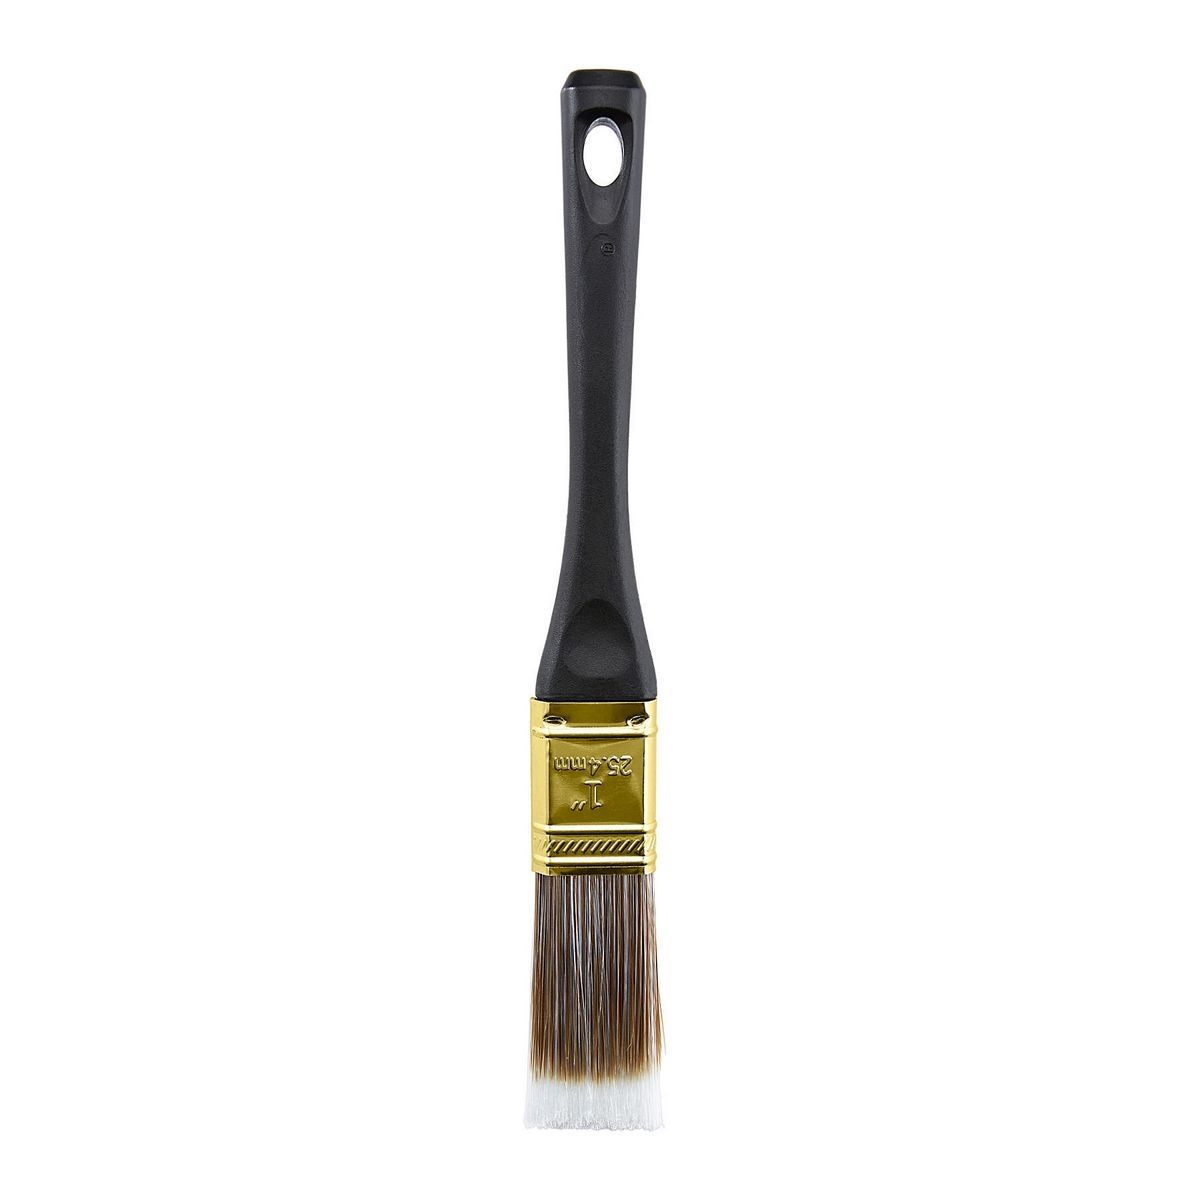 PROJECT SOURCE 1 in. Flat Paint Brush, GOOD Quality